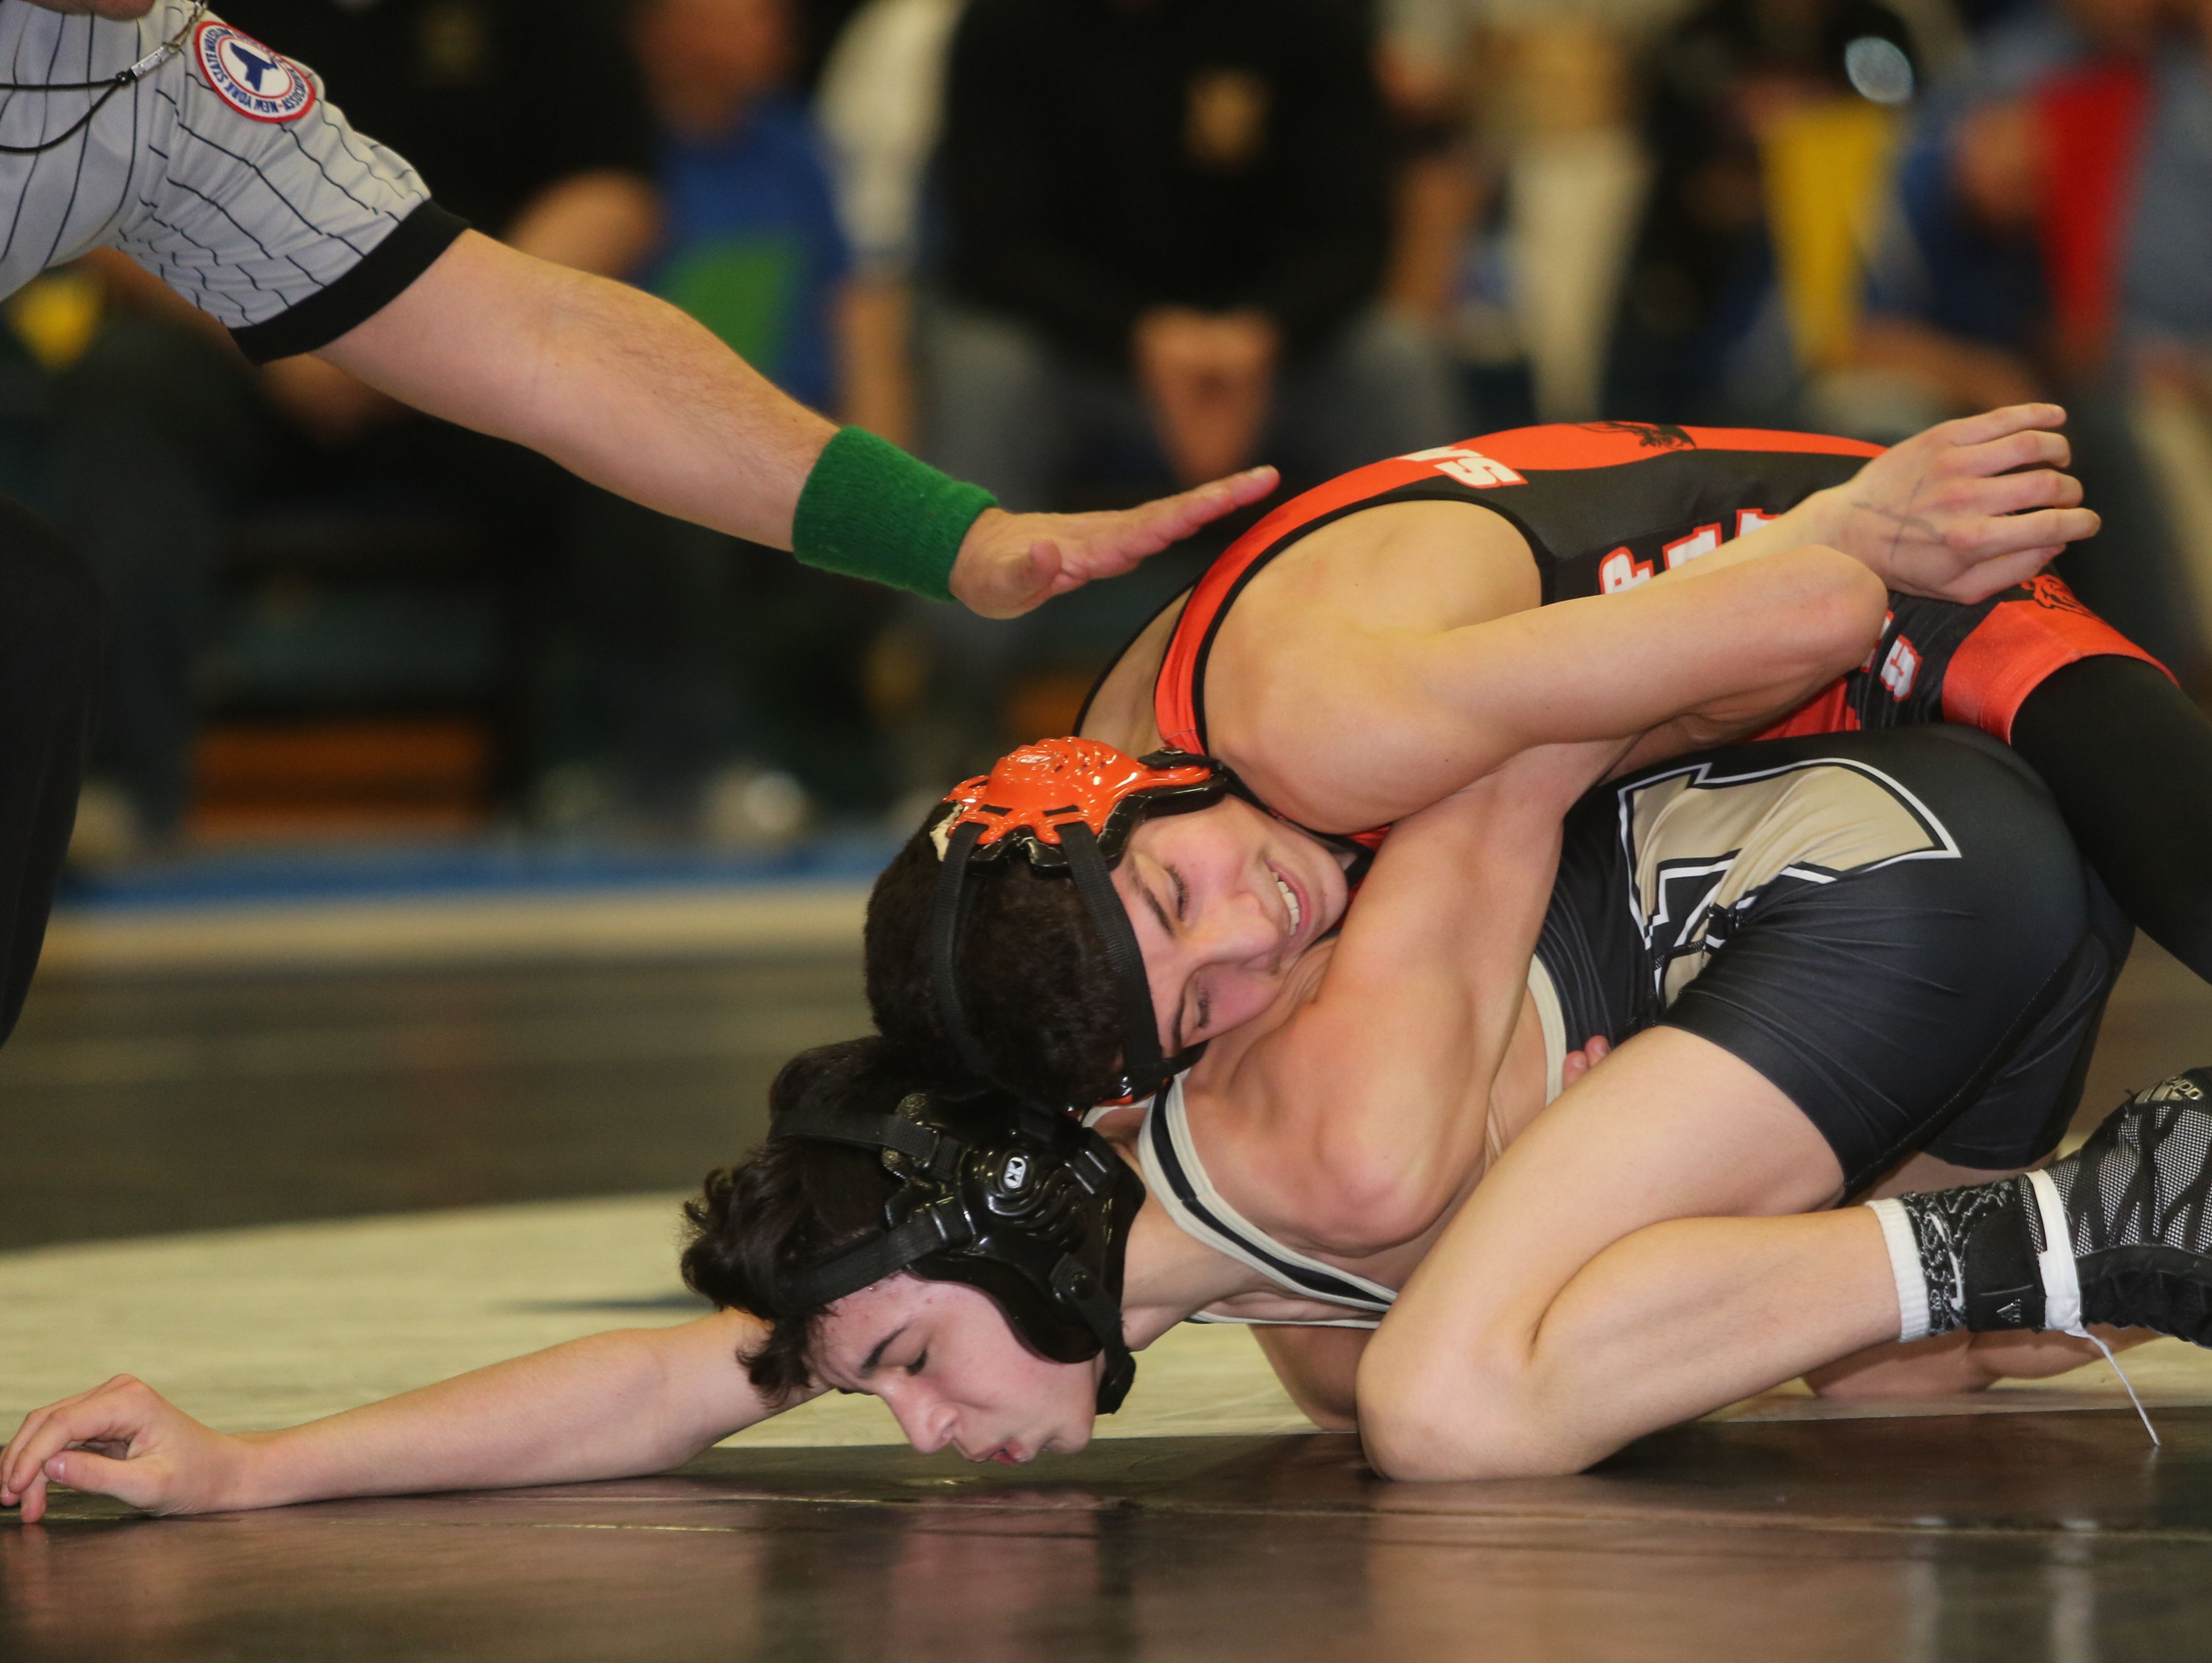 Pawling's Alex Santana, top, on his way to defeating Nanuet's Chris DiModugno in the 99 pound weight class, during the Section 1 Division 2 wrestling championships at Edgemont High School in Scarsdale, Feb. 11, 2017.